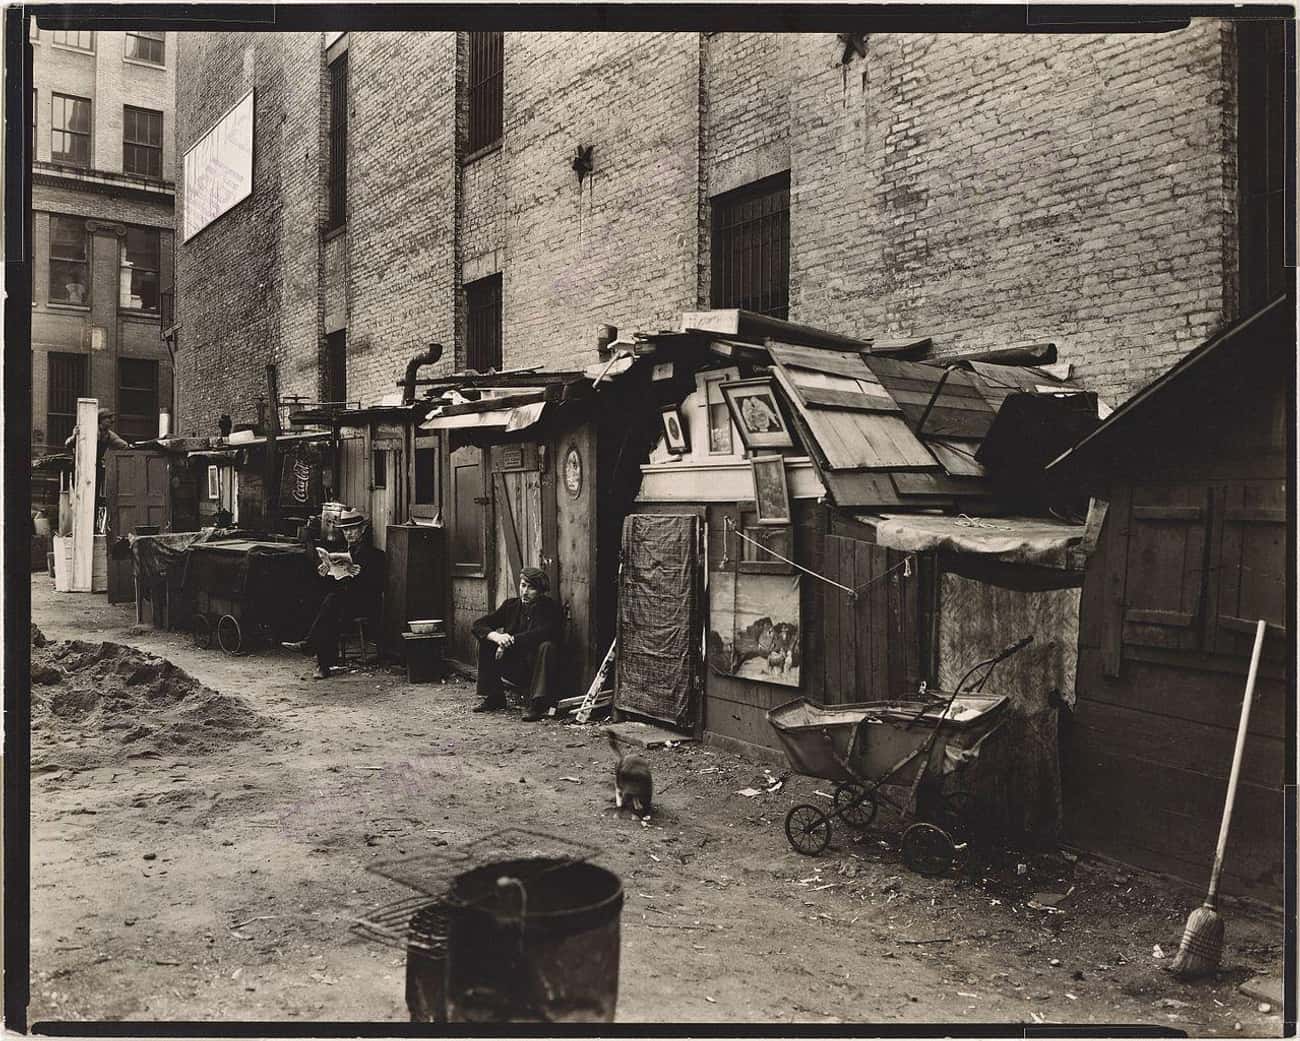 An Alley Of The Unemployed In Manhattan, 1935